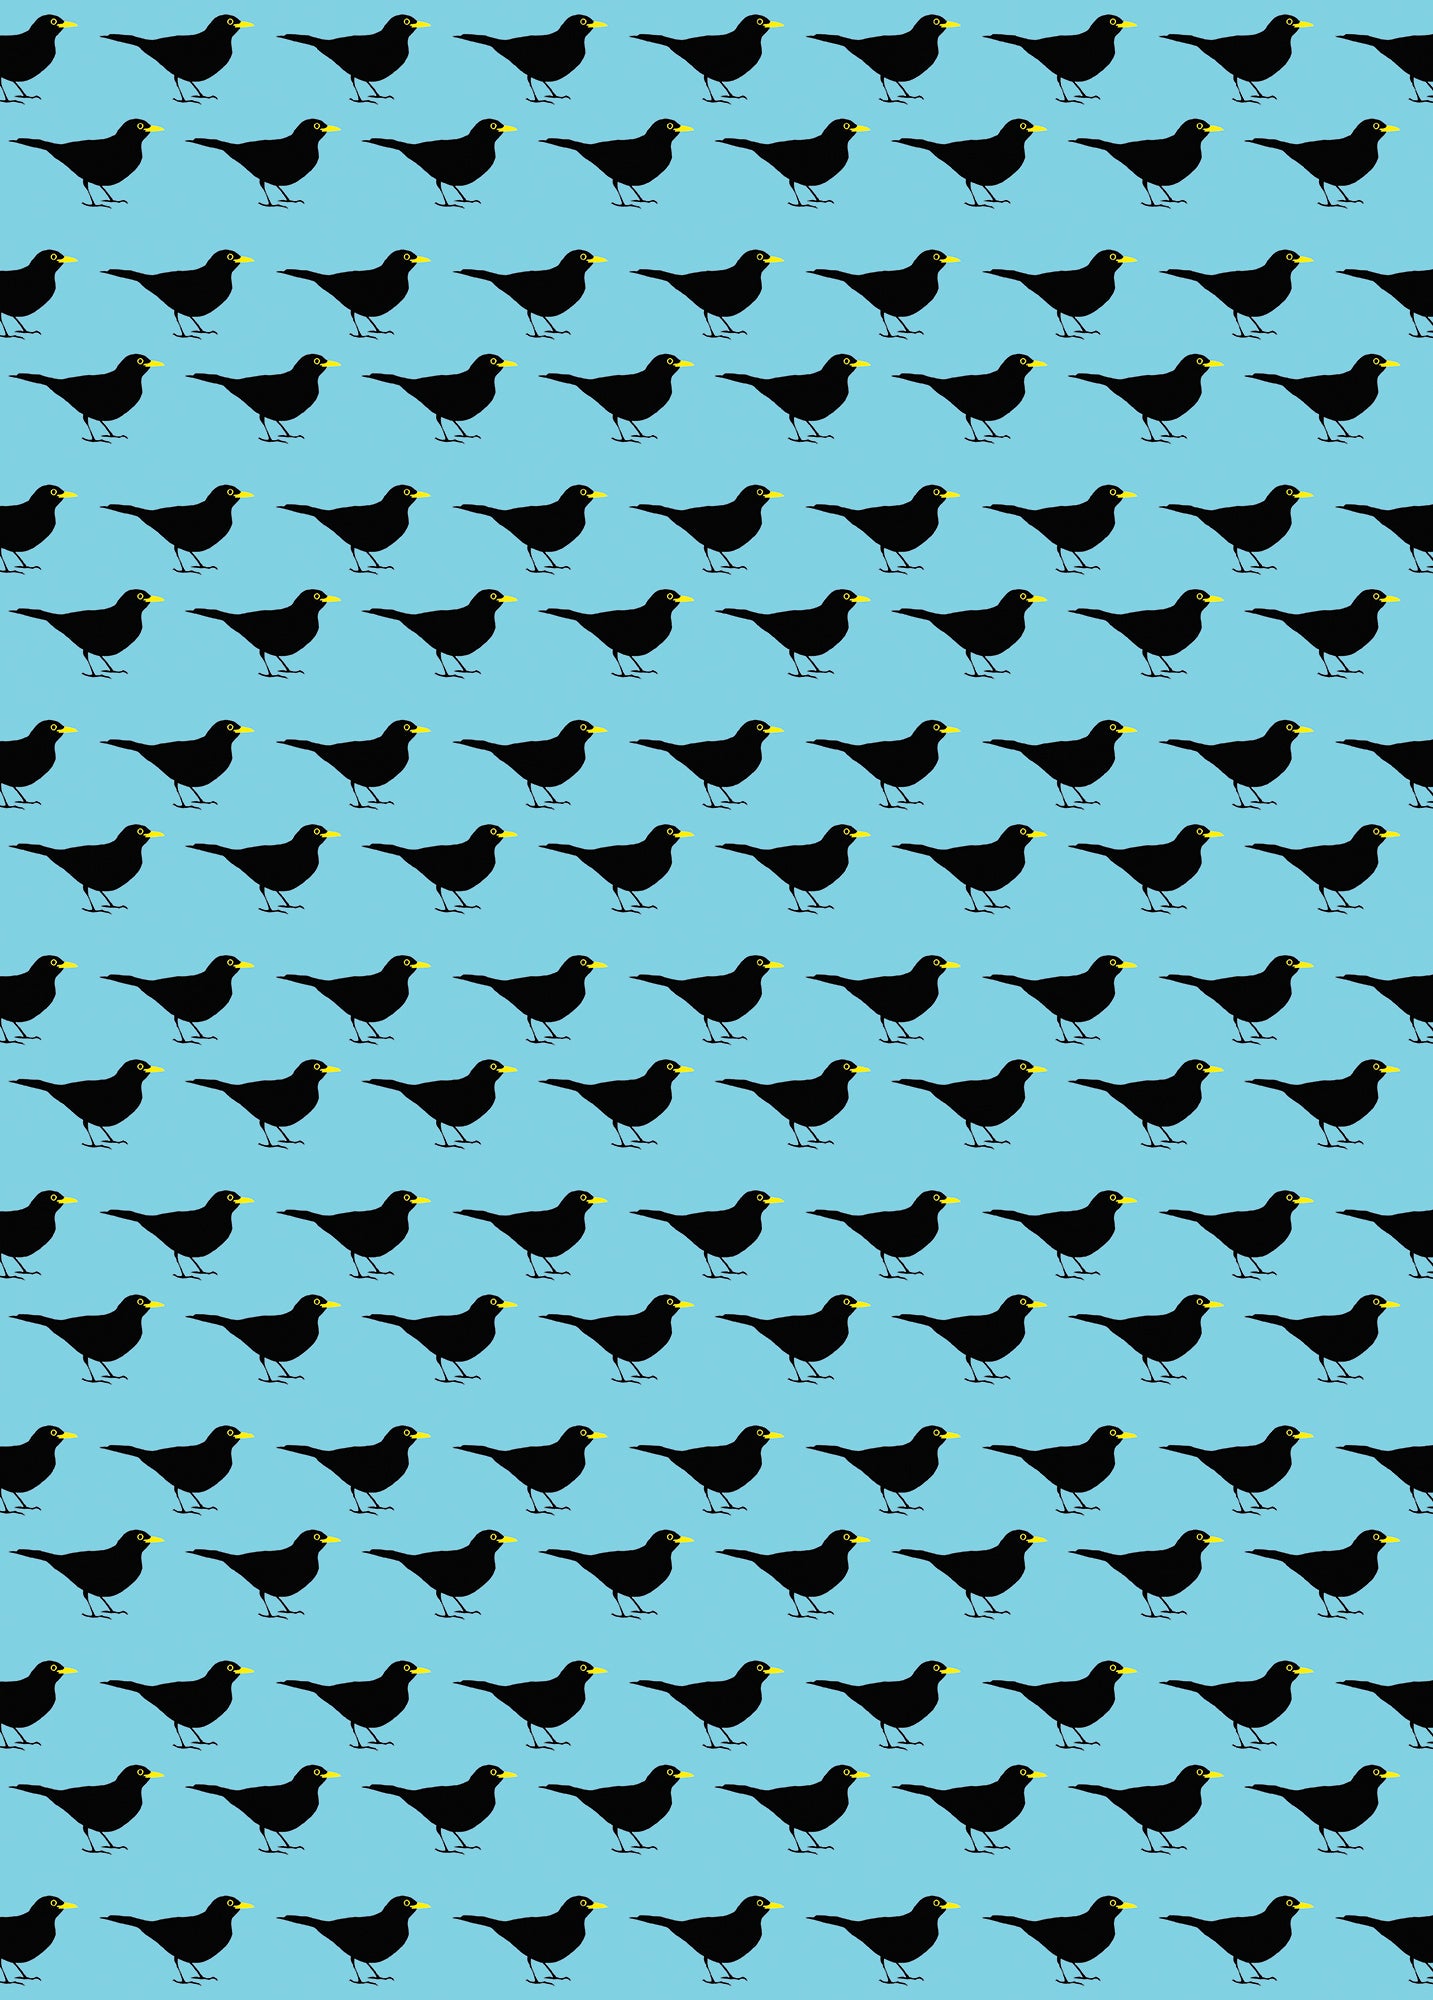 Blackbird wrapping paper - Inspired 